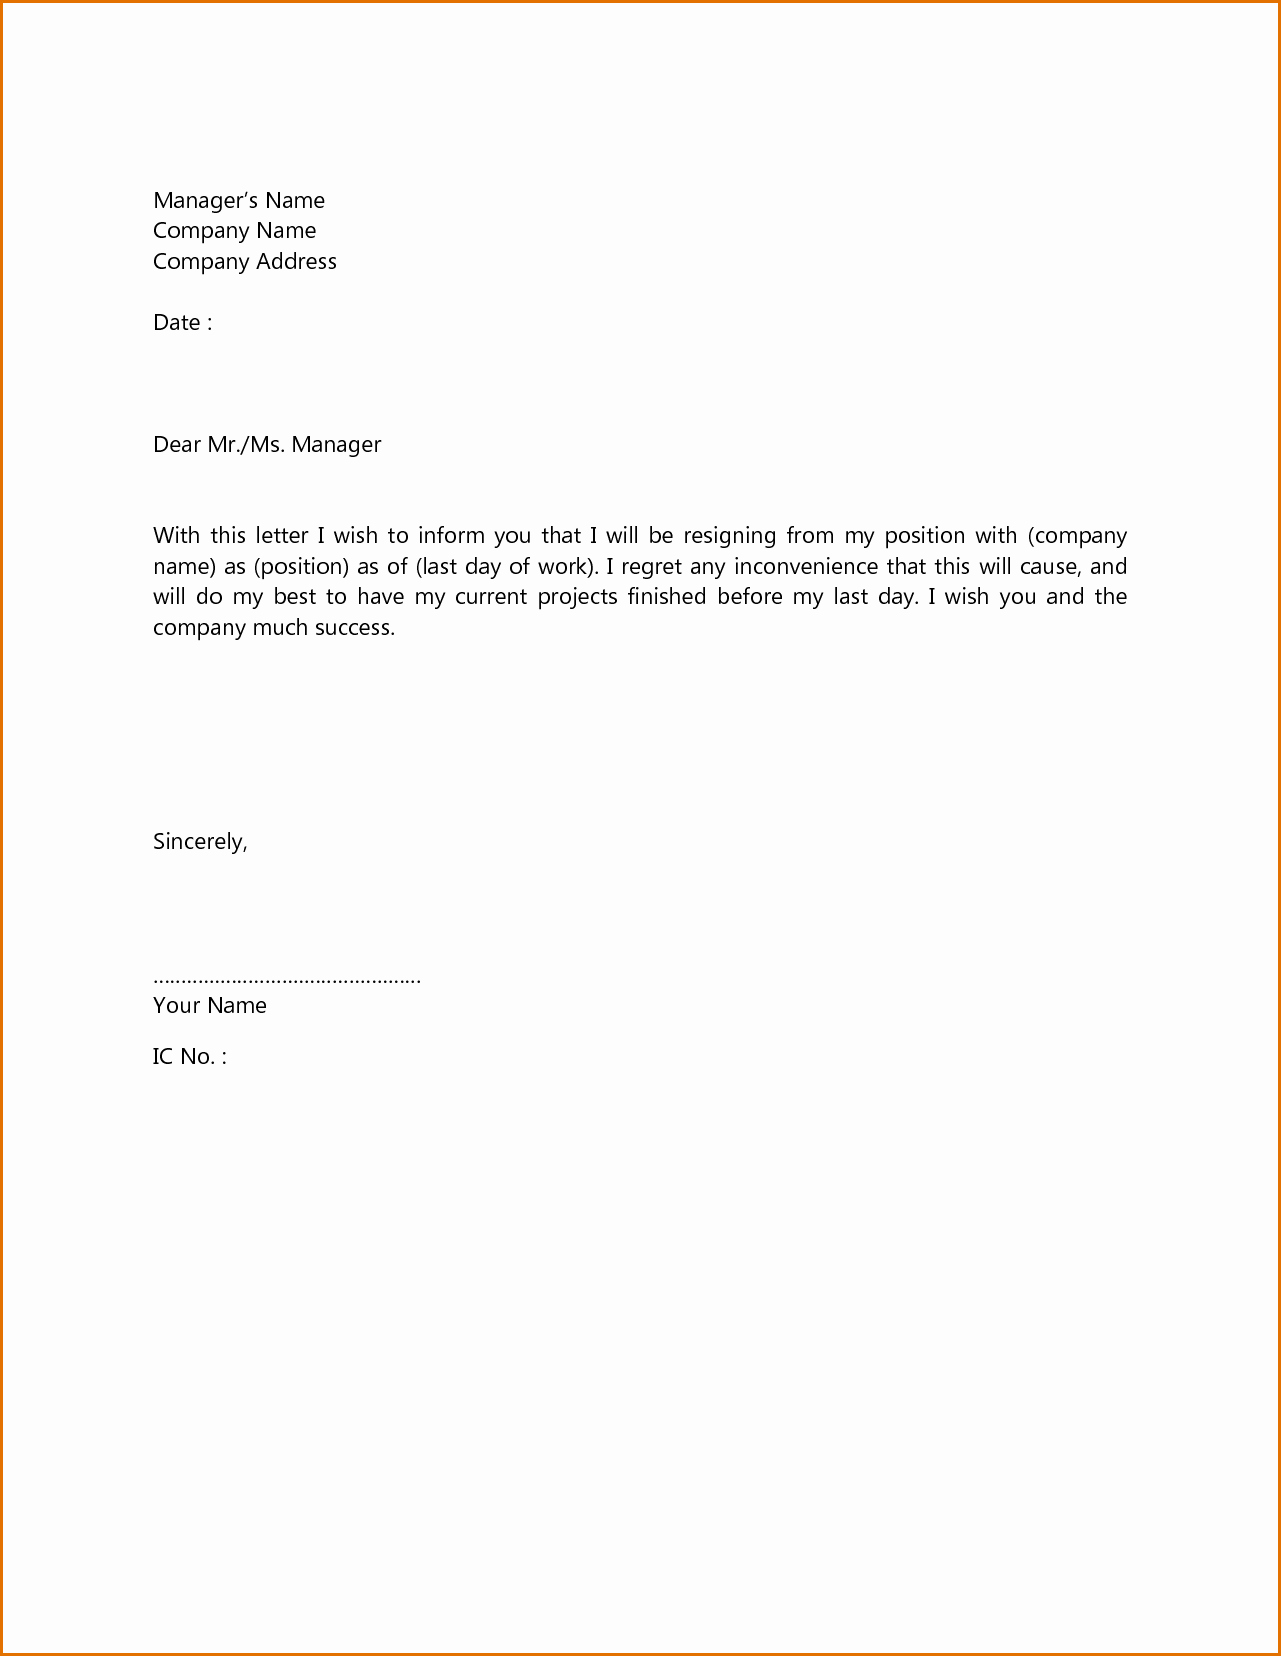 Resignation Letter Template Free Luxury Simple format Resignation Letter Resume Layout 2017